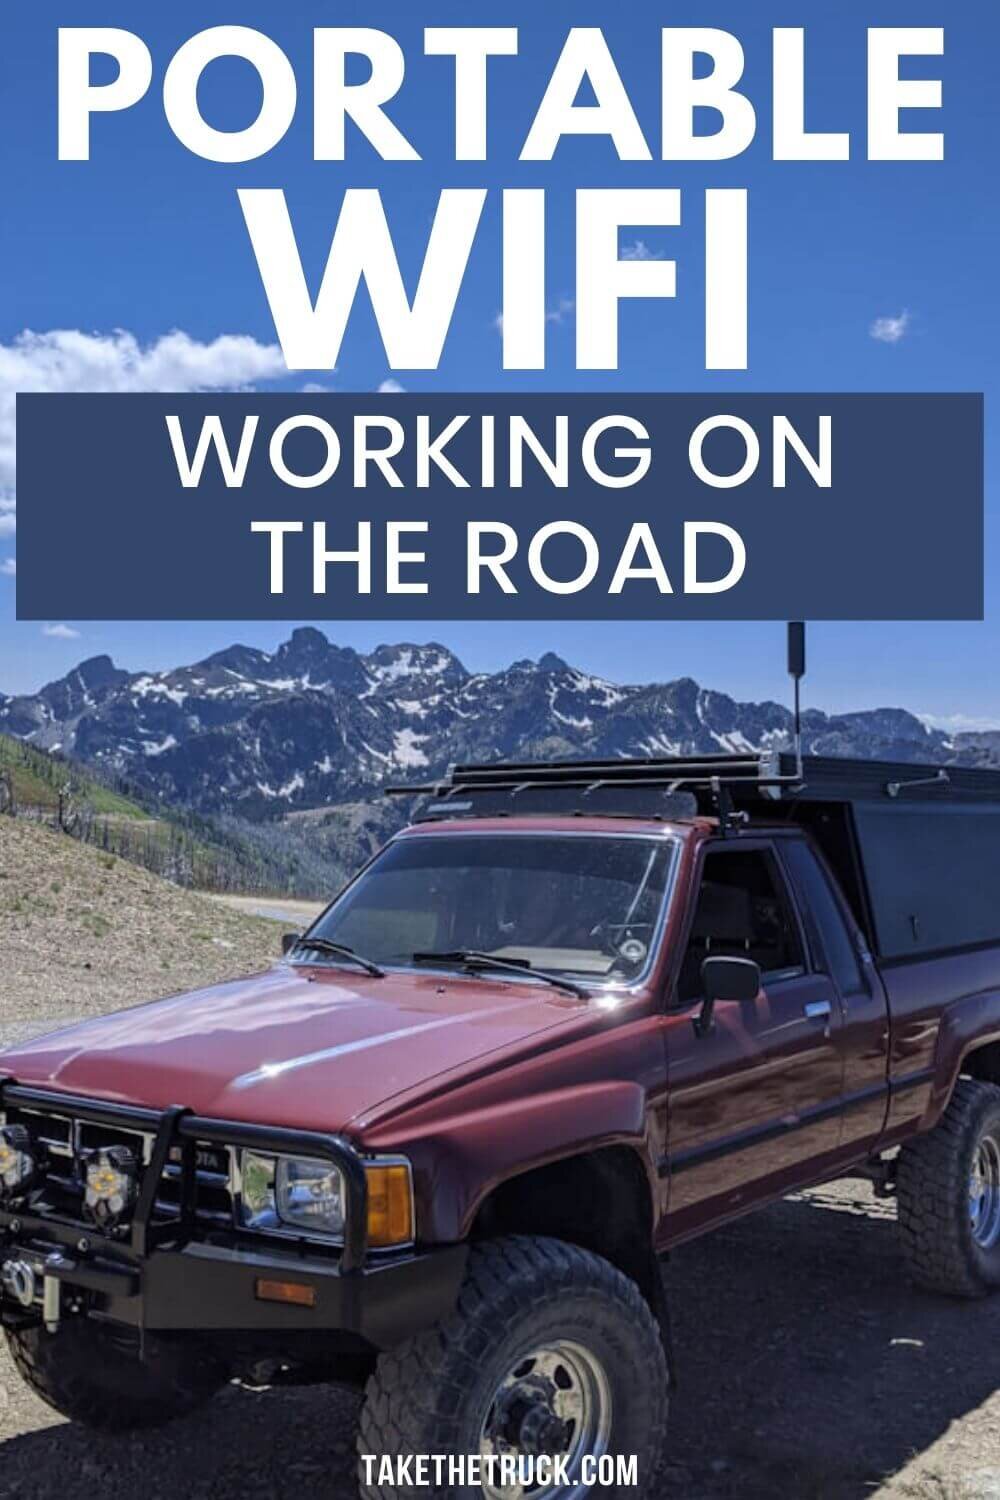 Read this if you need wifi while camping! We’ve finally found a portable camping wifi antenne and cell signal booster that helps provide wifi while traveling, camping, or RVing!